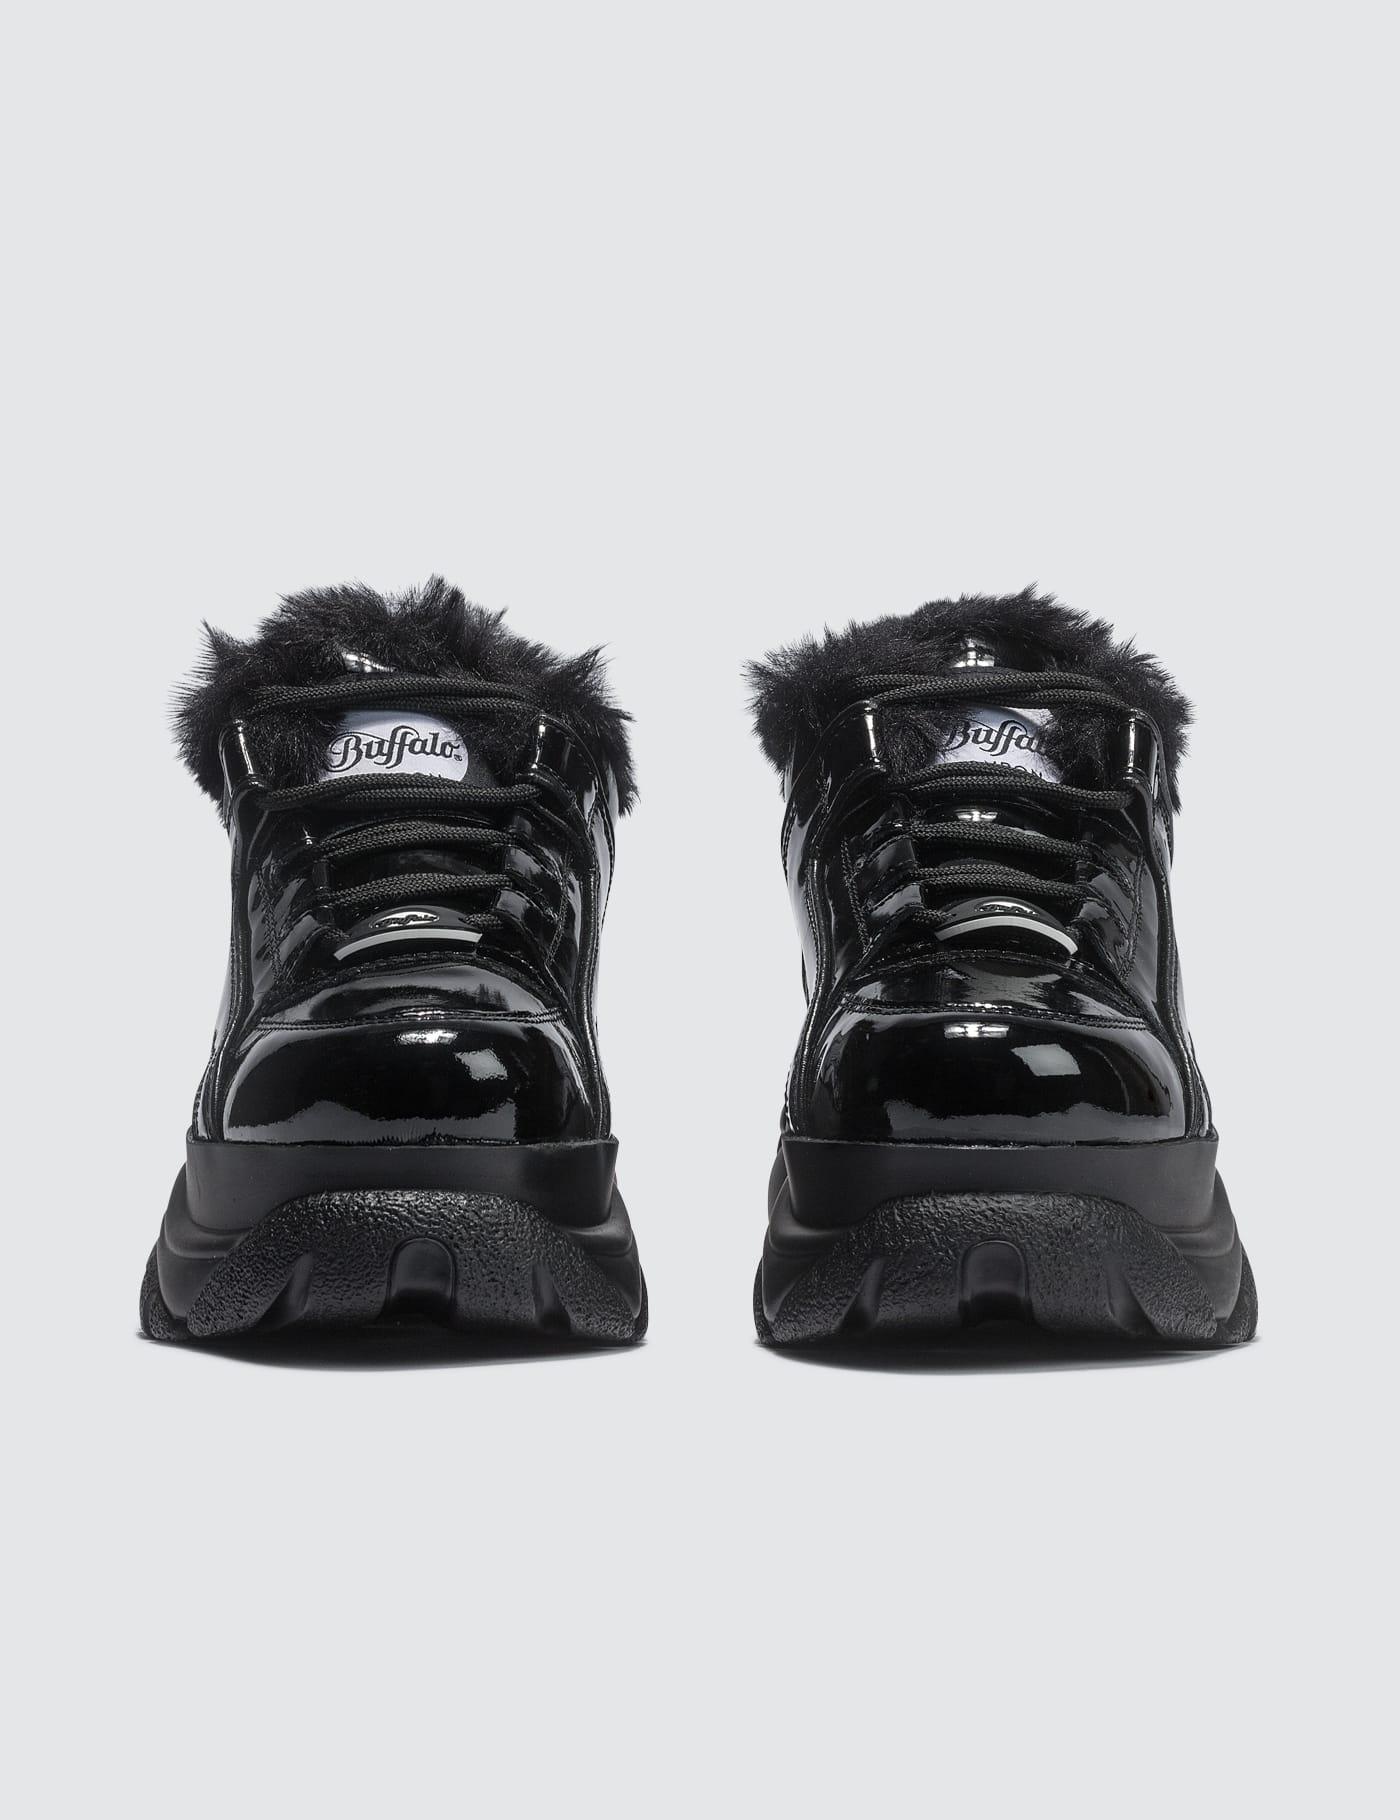 BUFFALO LONDON Patent Leather Low Top Sneakers With Fur in Black | Lyst